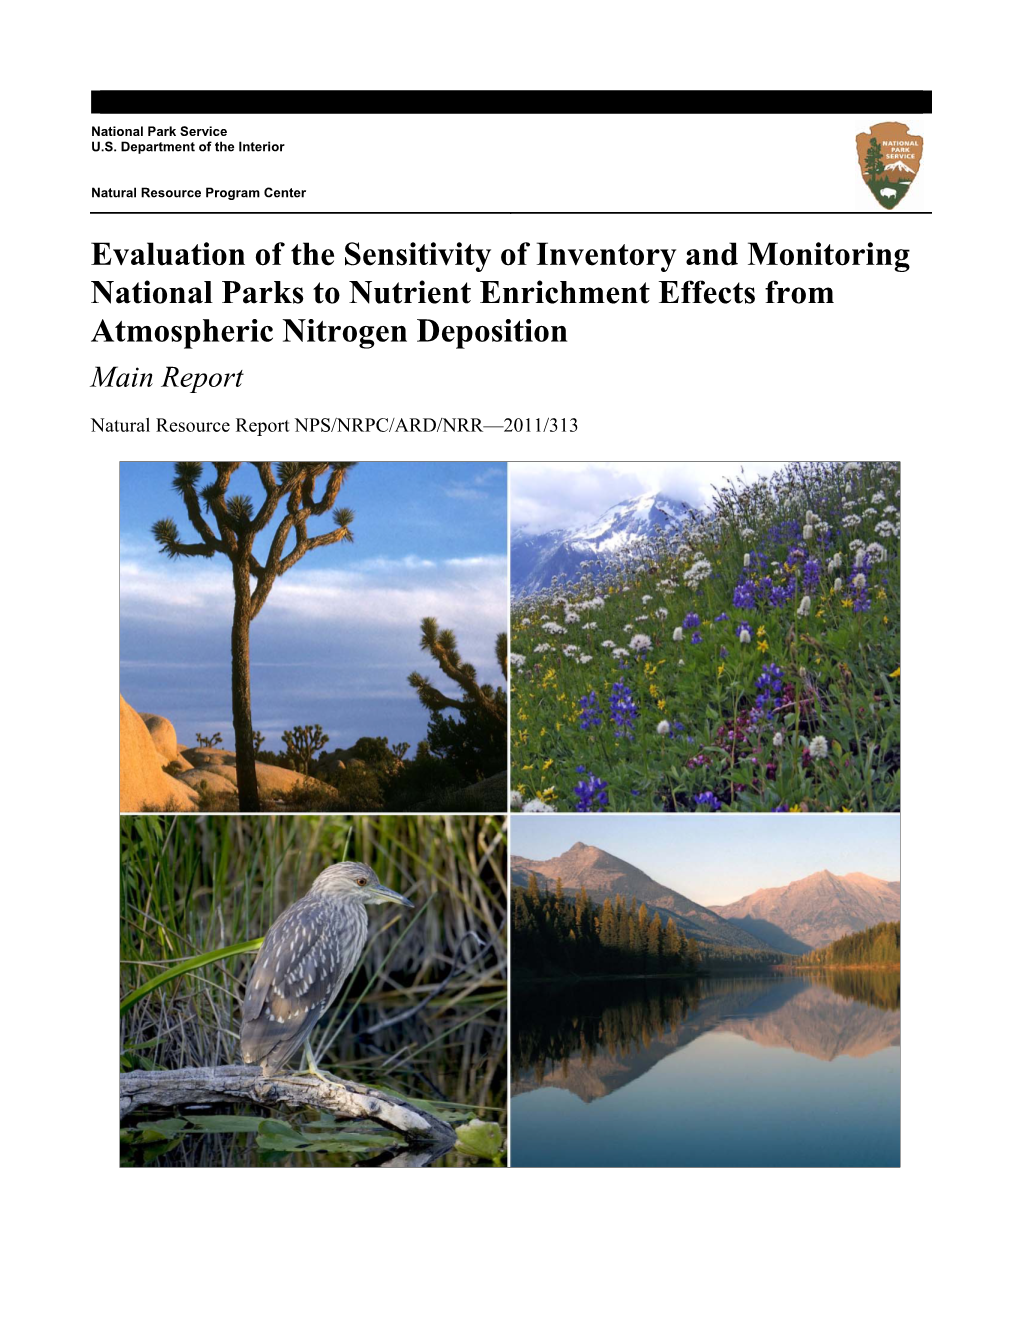 Evaluation of the Sensitivity of Inventory and Monitoring National Parks to Nutrient Enrichment Effects from Atmospheric Nitrogen Deposition Main Report